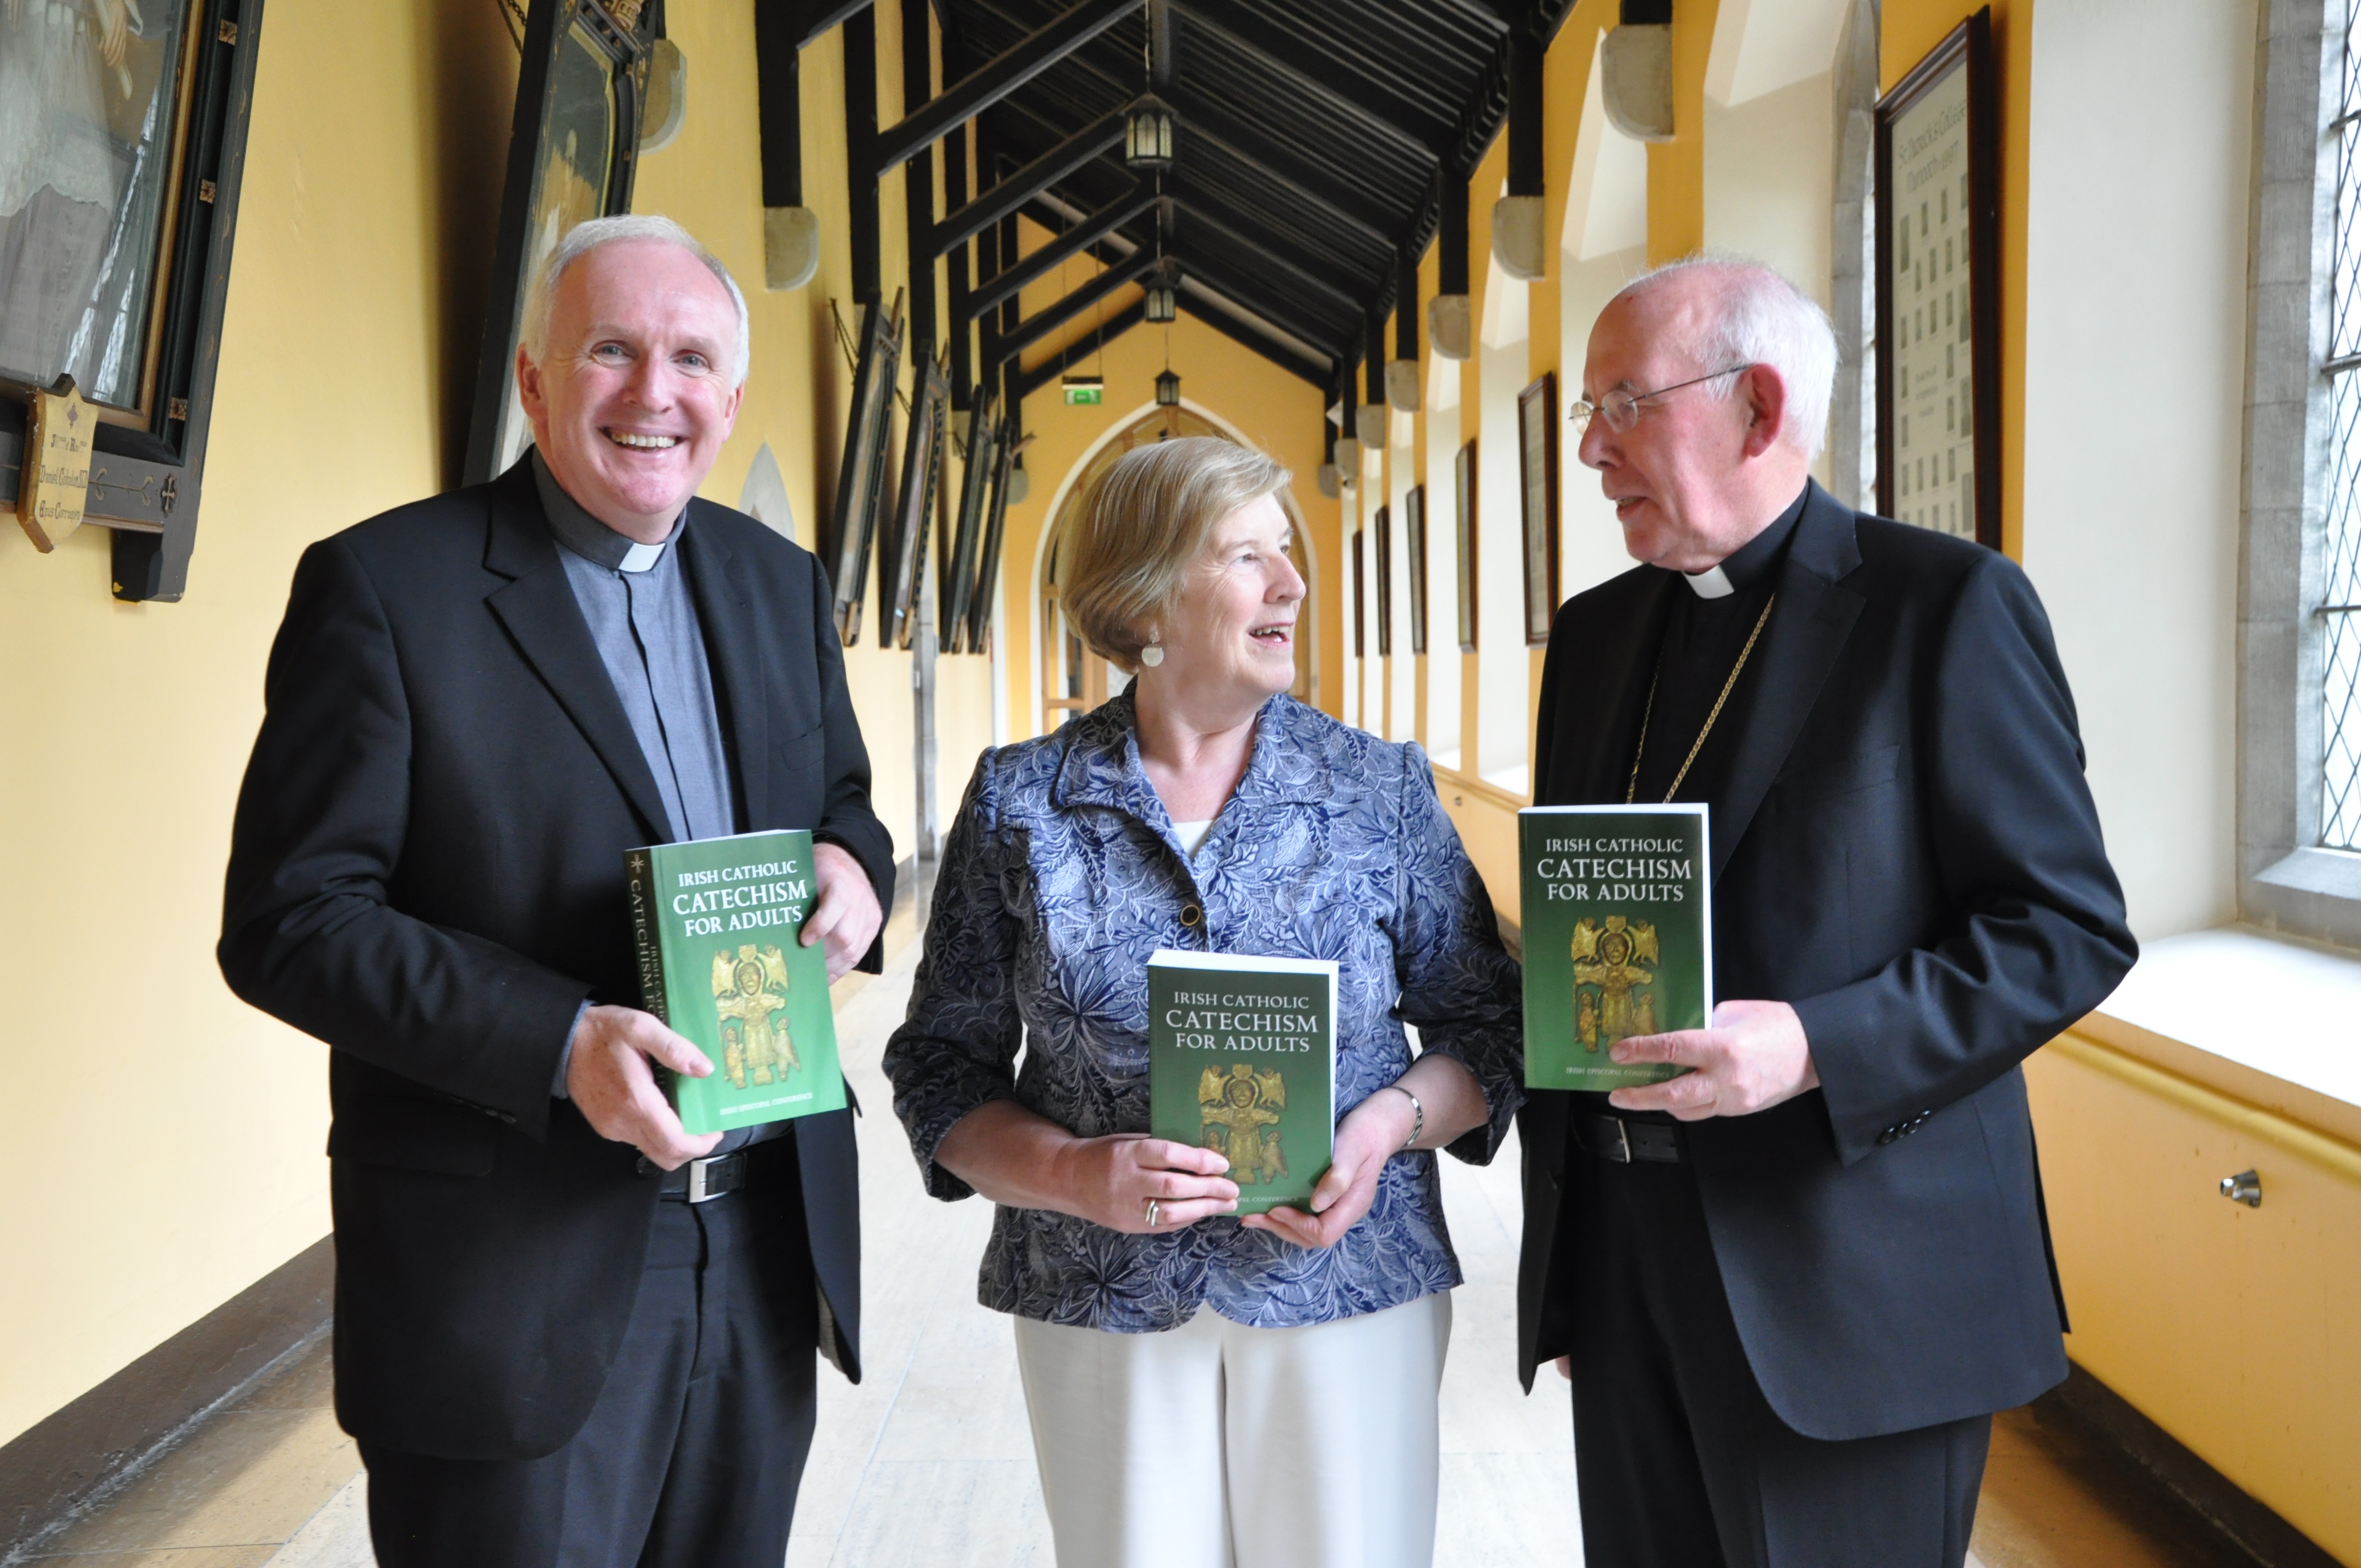 Bishop Brendan Leahy, Maura Hyland and Cardinal Brady at Launch of the Irish Catholic Catechism for Adults 9 June 2014 PIC by Brenda Drumm 010